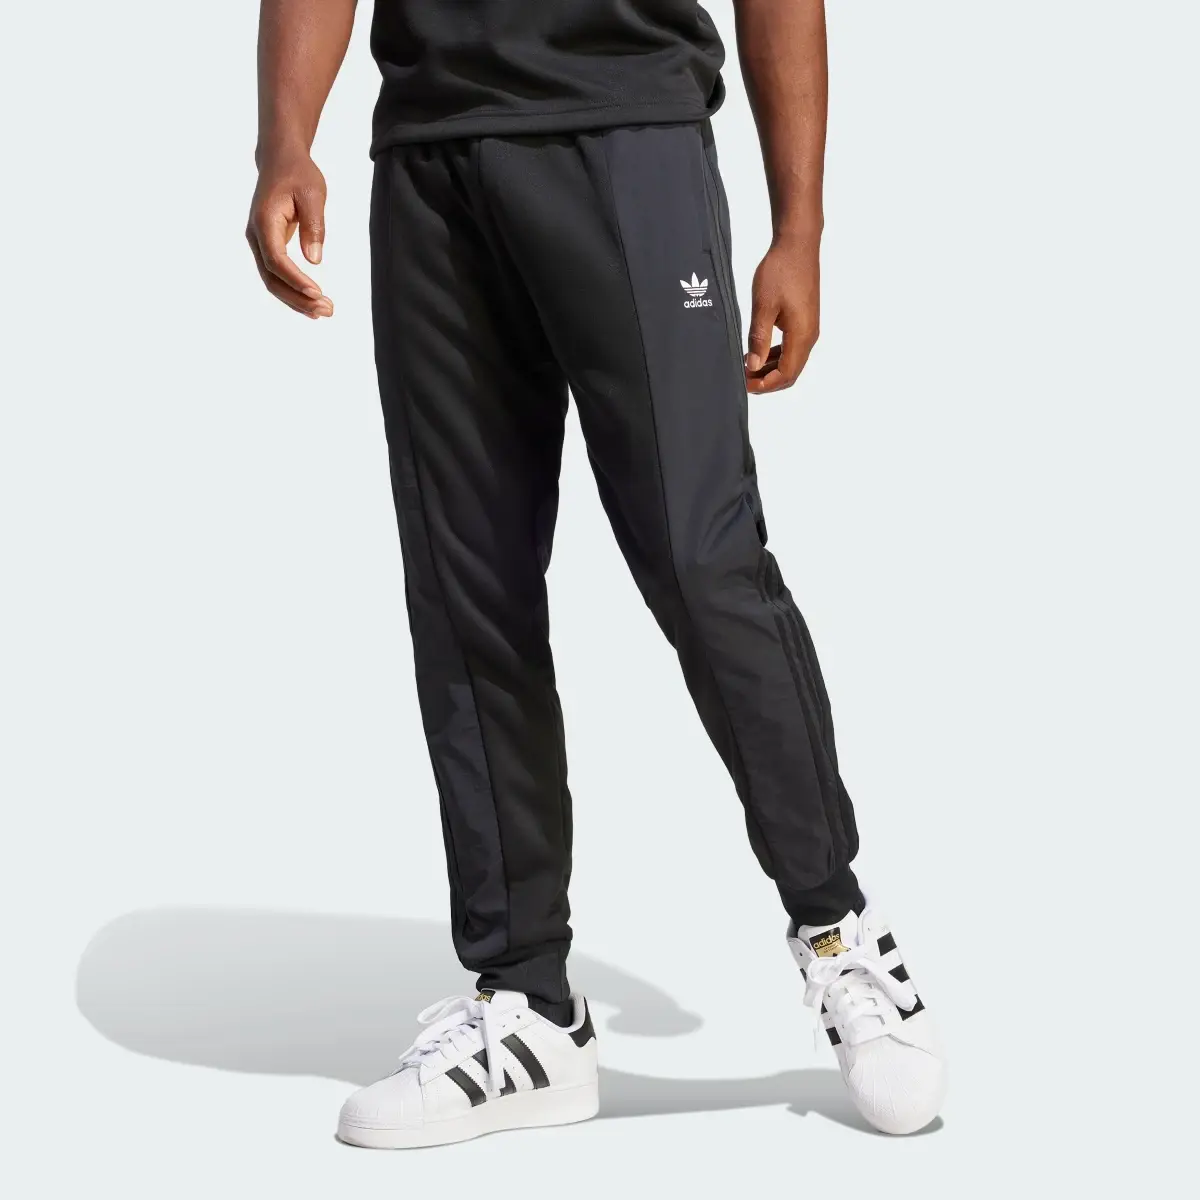 Adidas Adicolor Re-Pro SST Material Mix Tracksuit Bottoms. 1